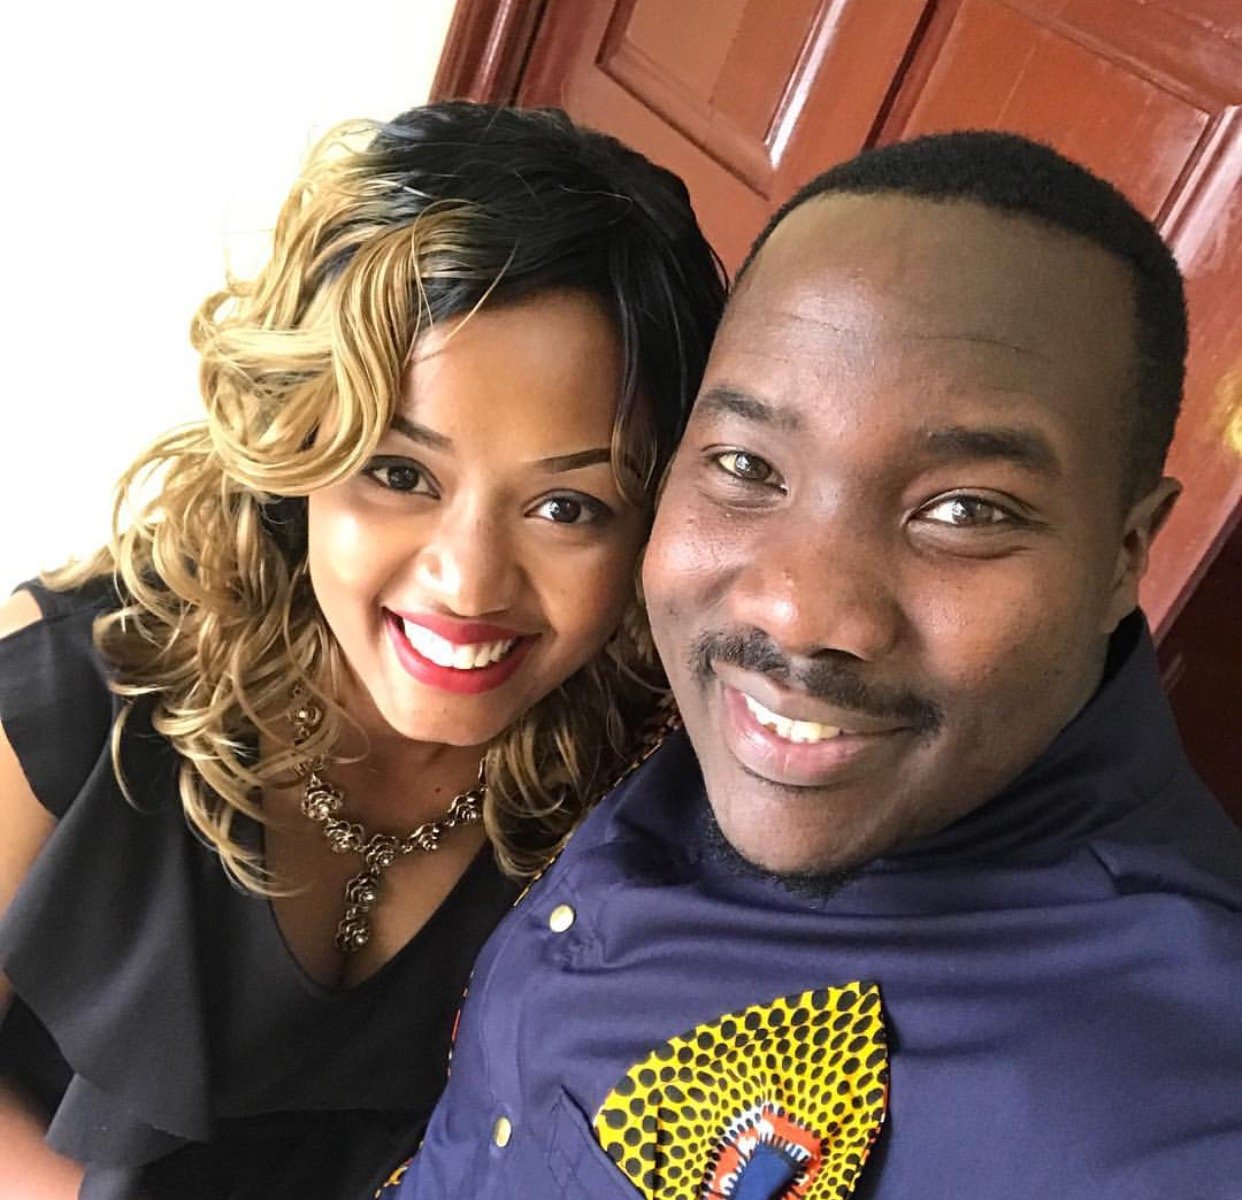 Citizen TV's Willis Raburu opens up about the main reason he was forced to lose weight